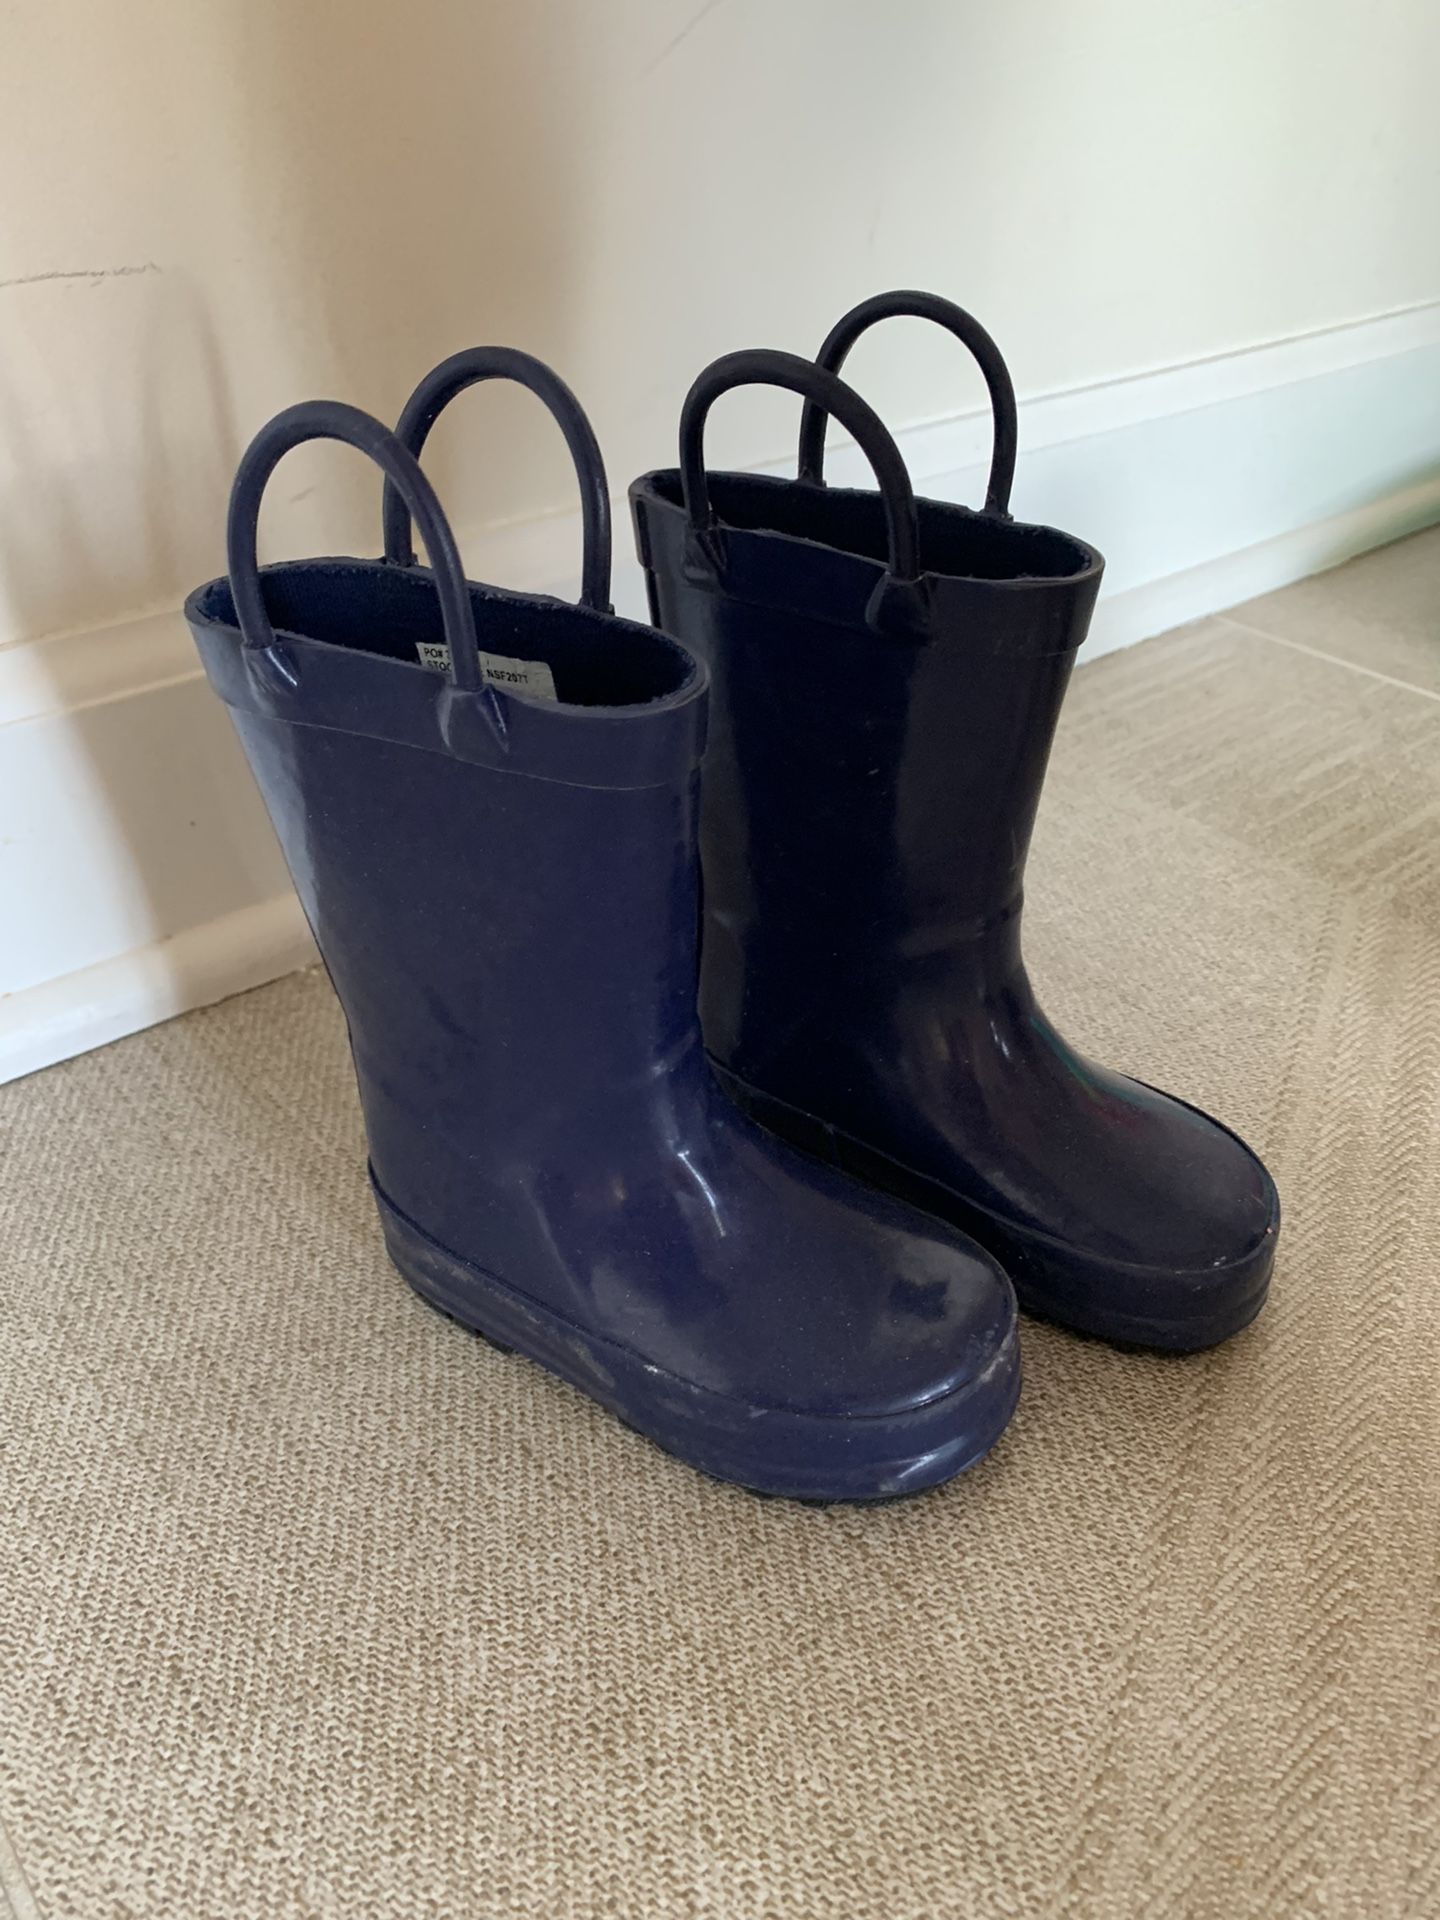 Navy Rain Boots Size 5 Toddler 